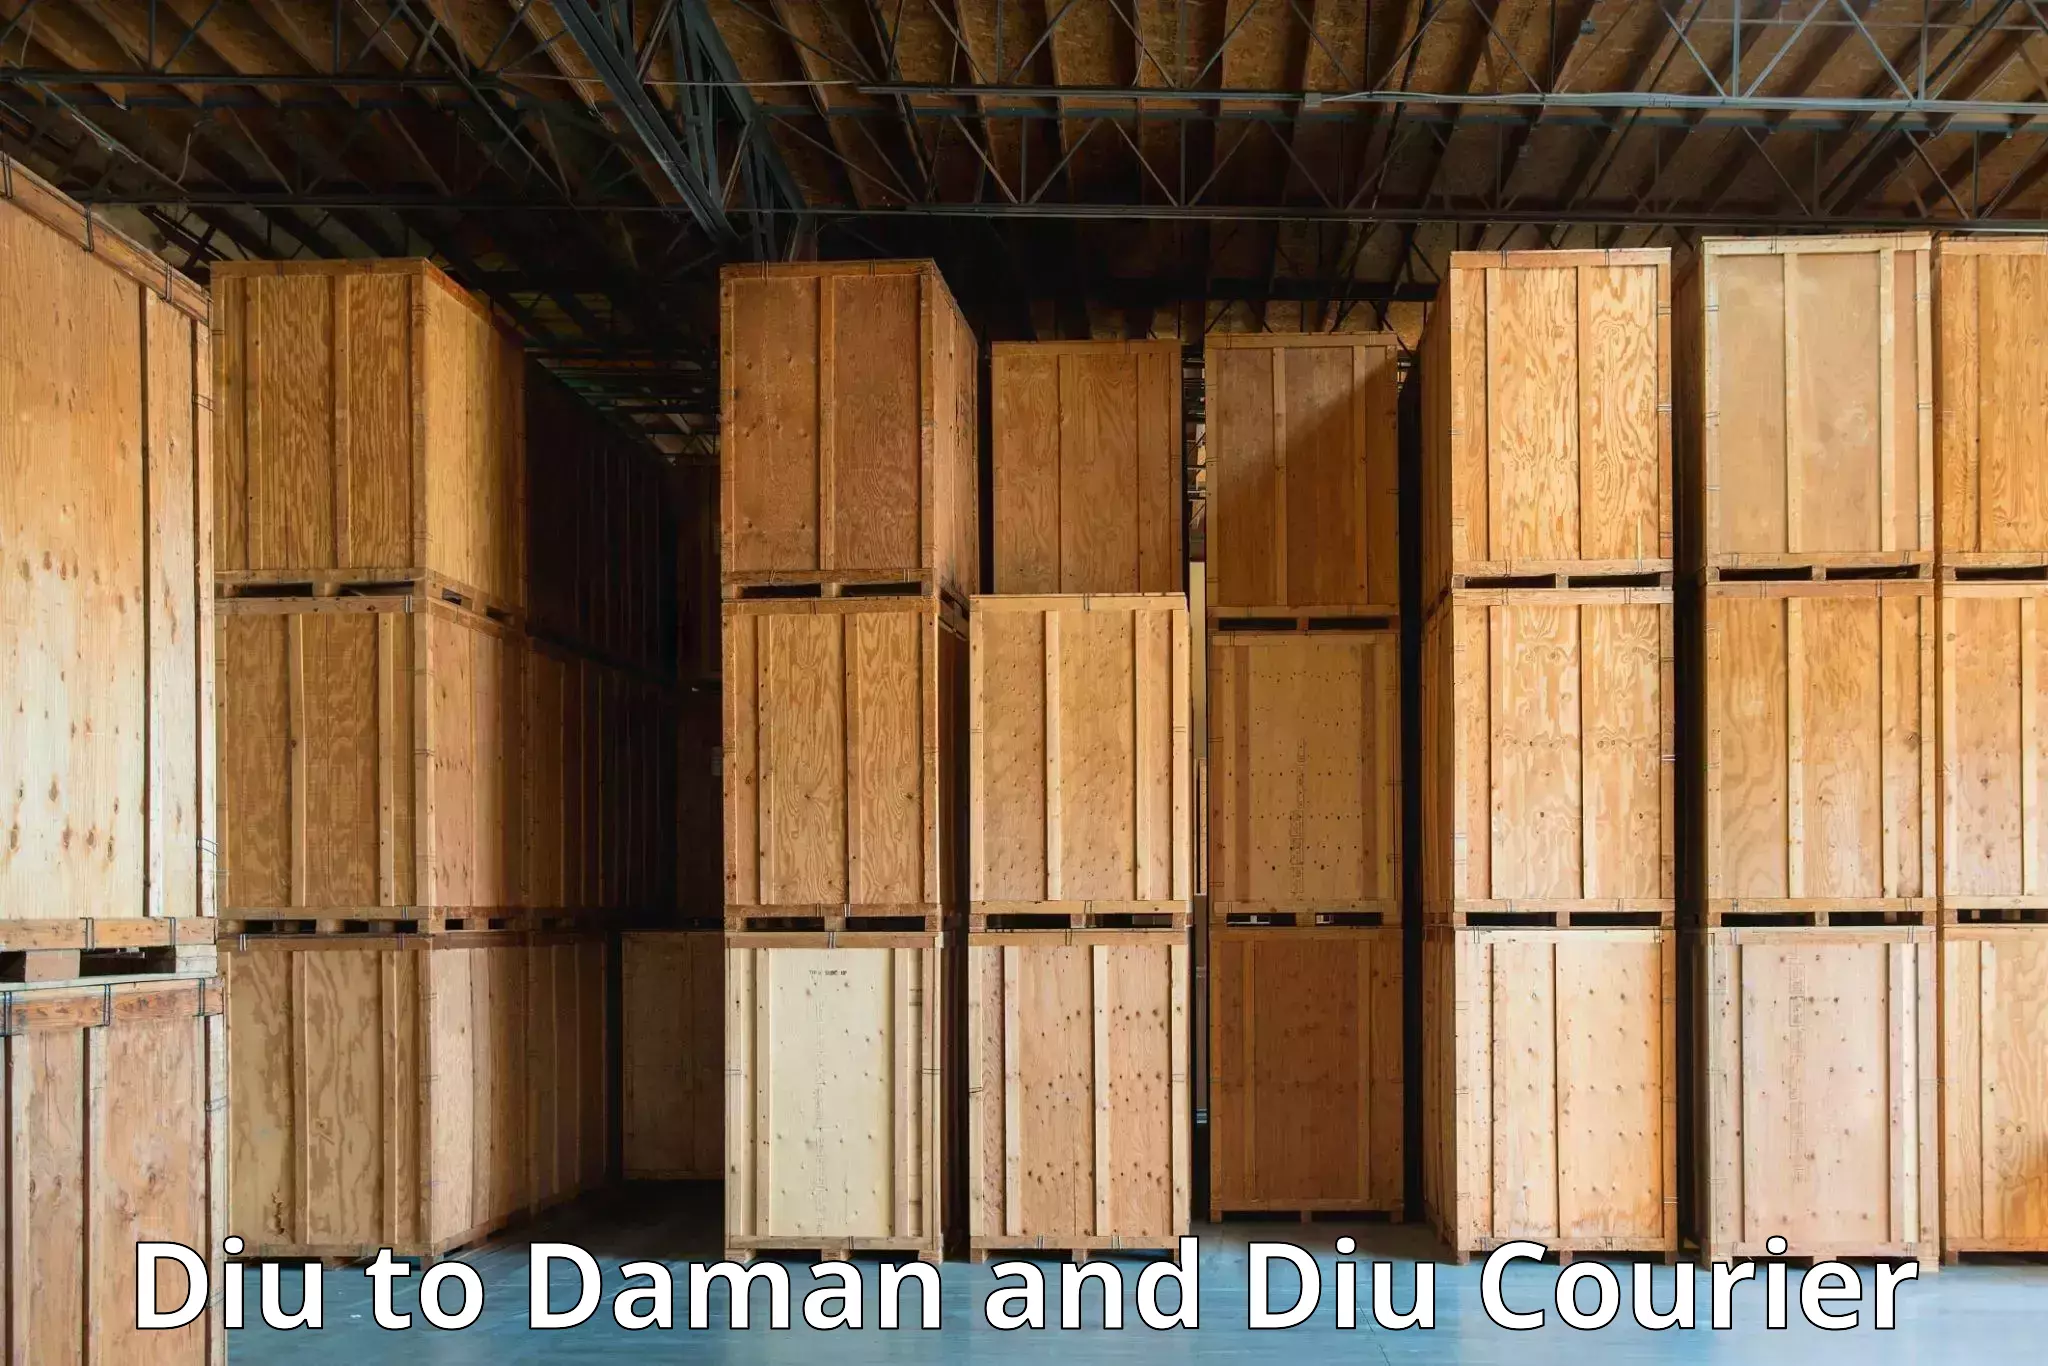 Sustainable delivery practices Diu to Daman and Diu